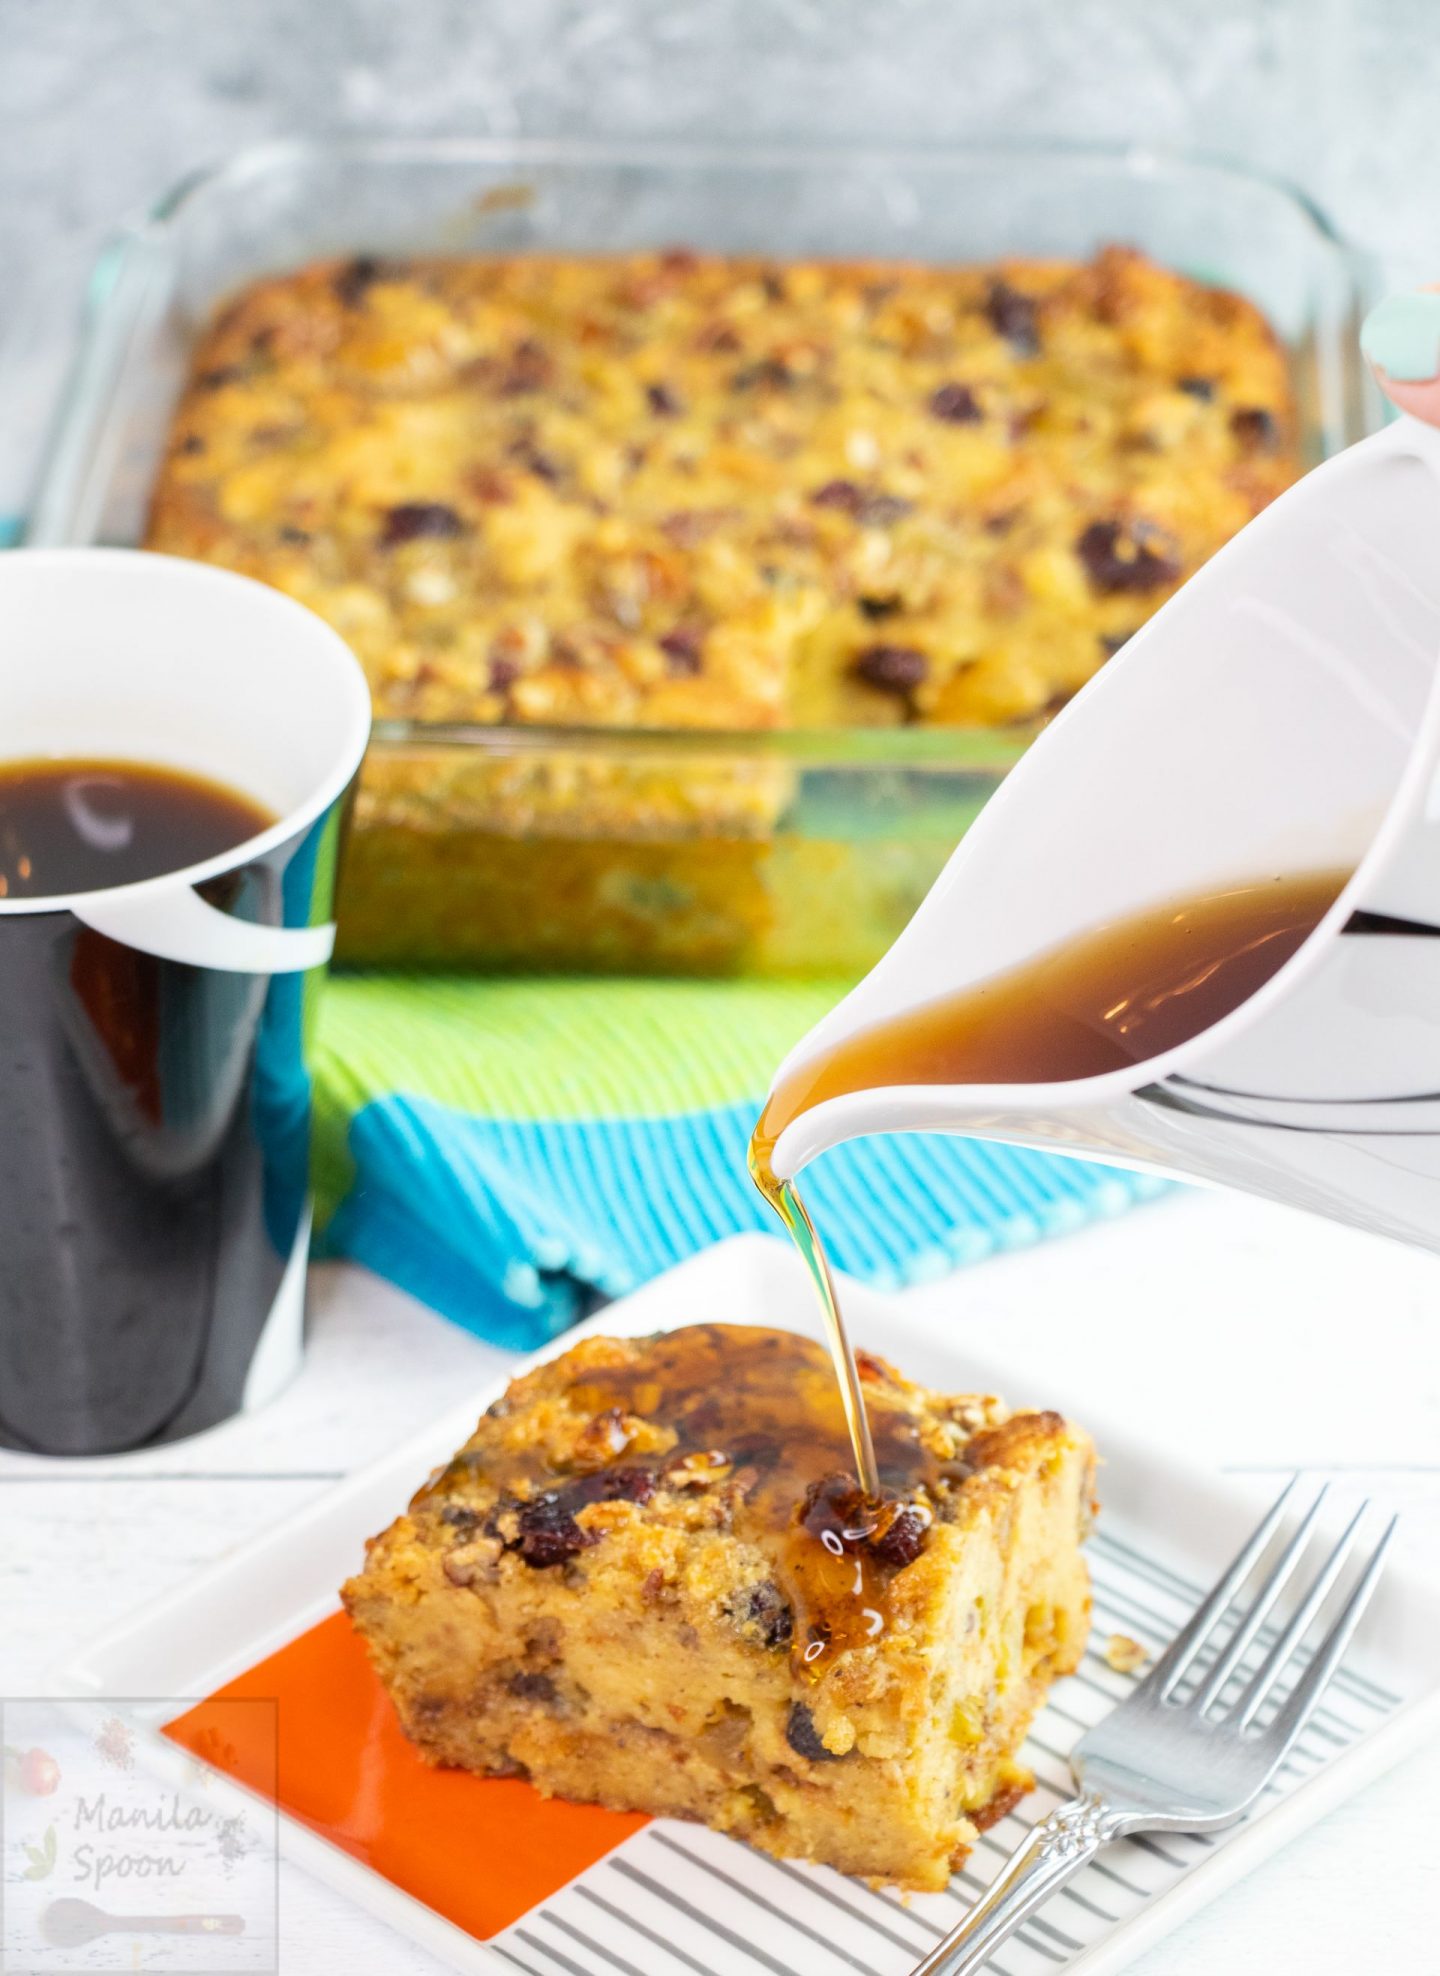 
Set aside your usual bread and butter pudding and make this delectable version made with panettone (rich Italian bread), seasoned with aromatic spices then laden with fruits and nuts.